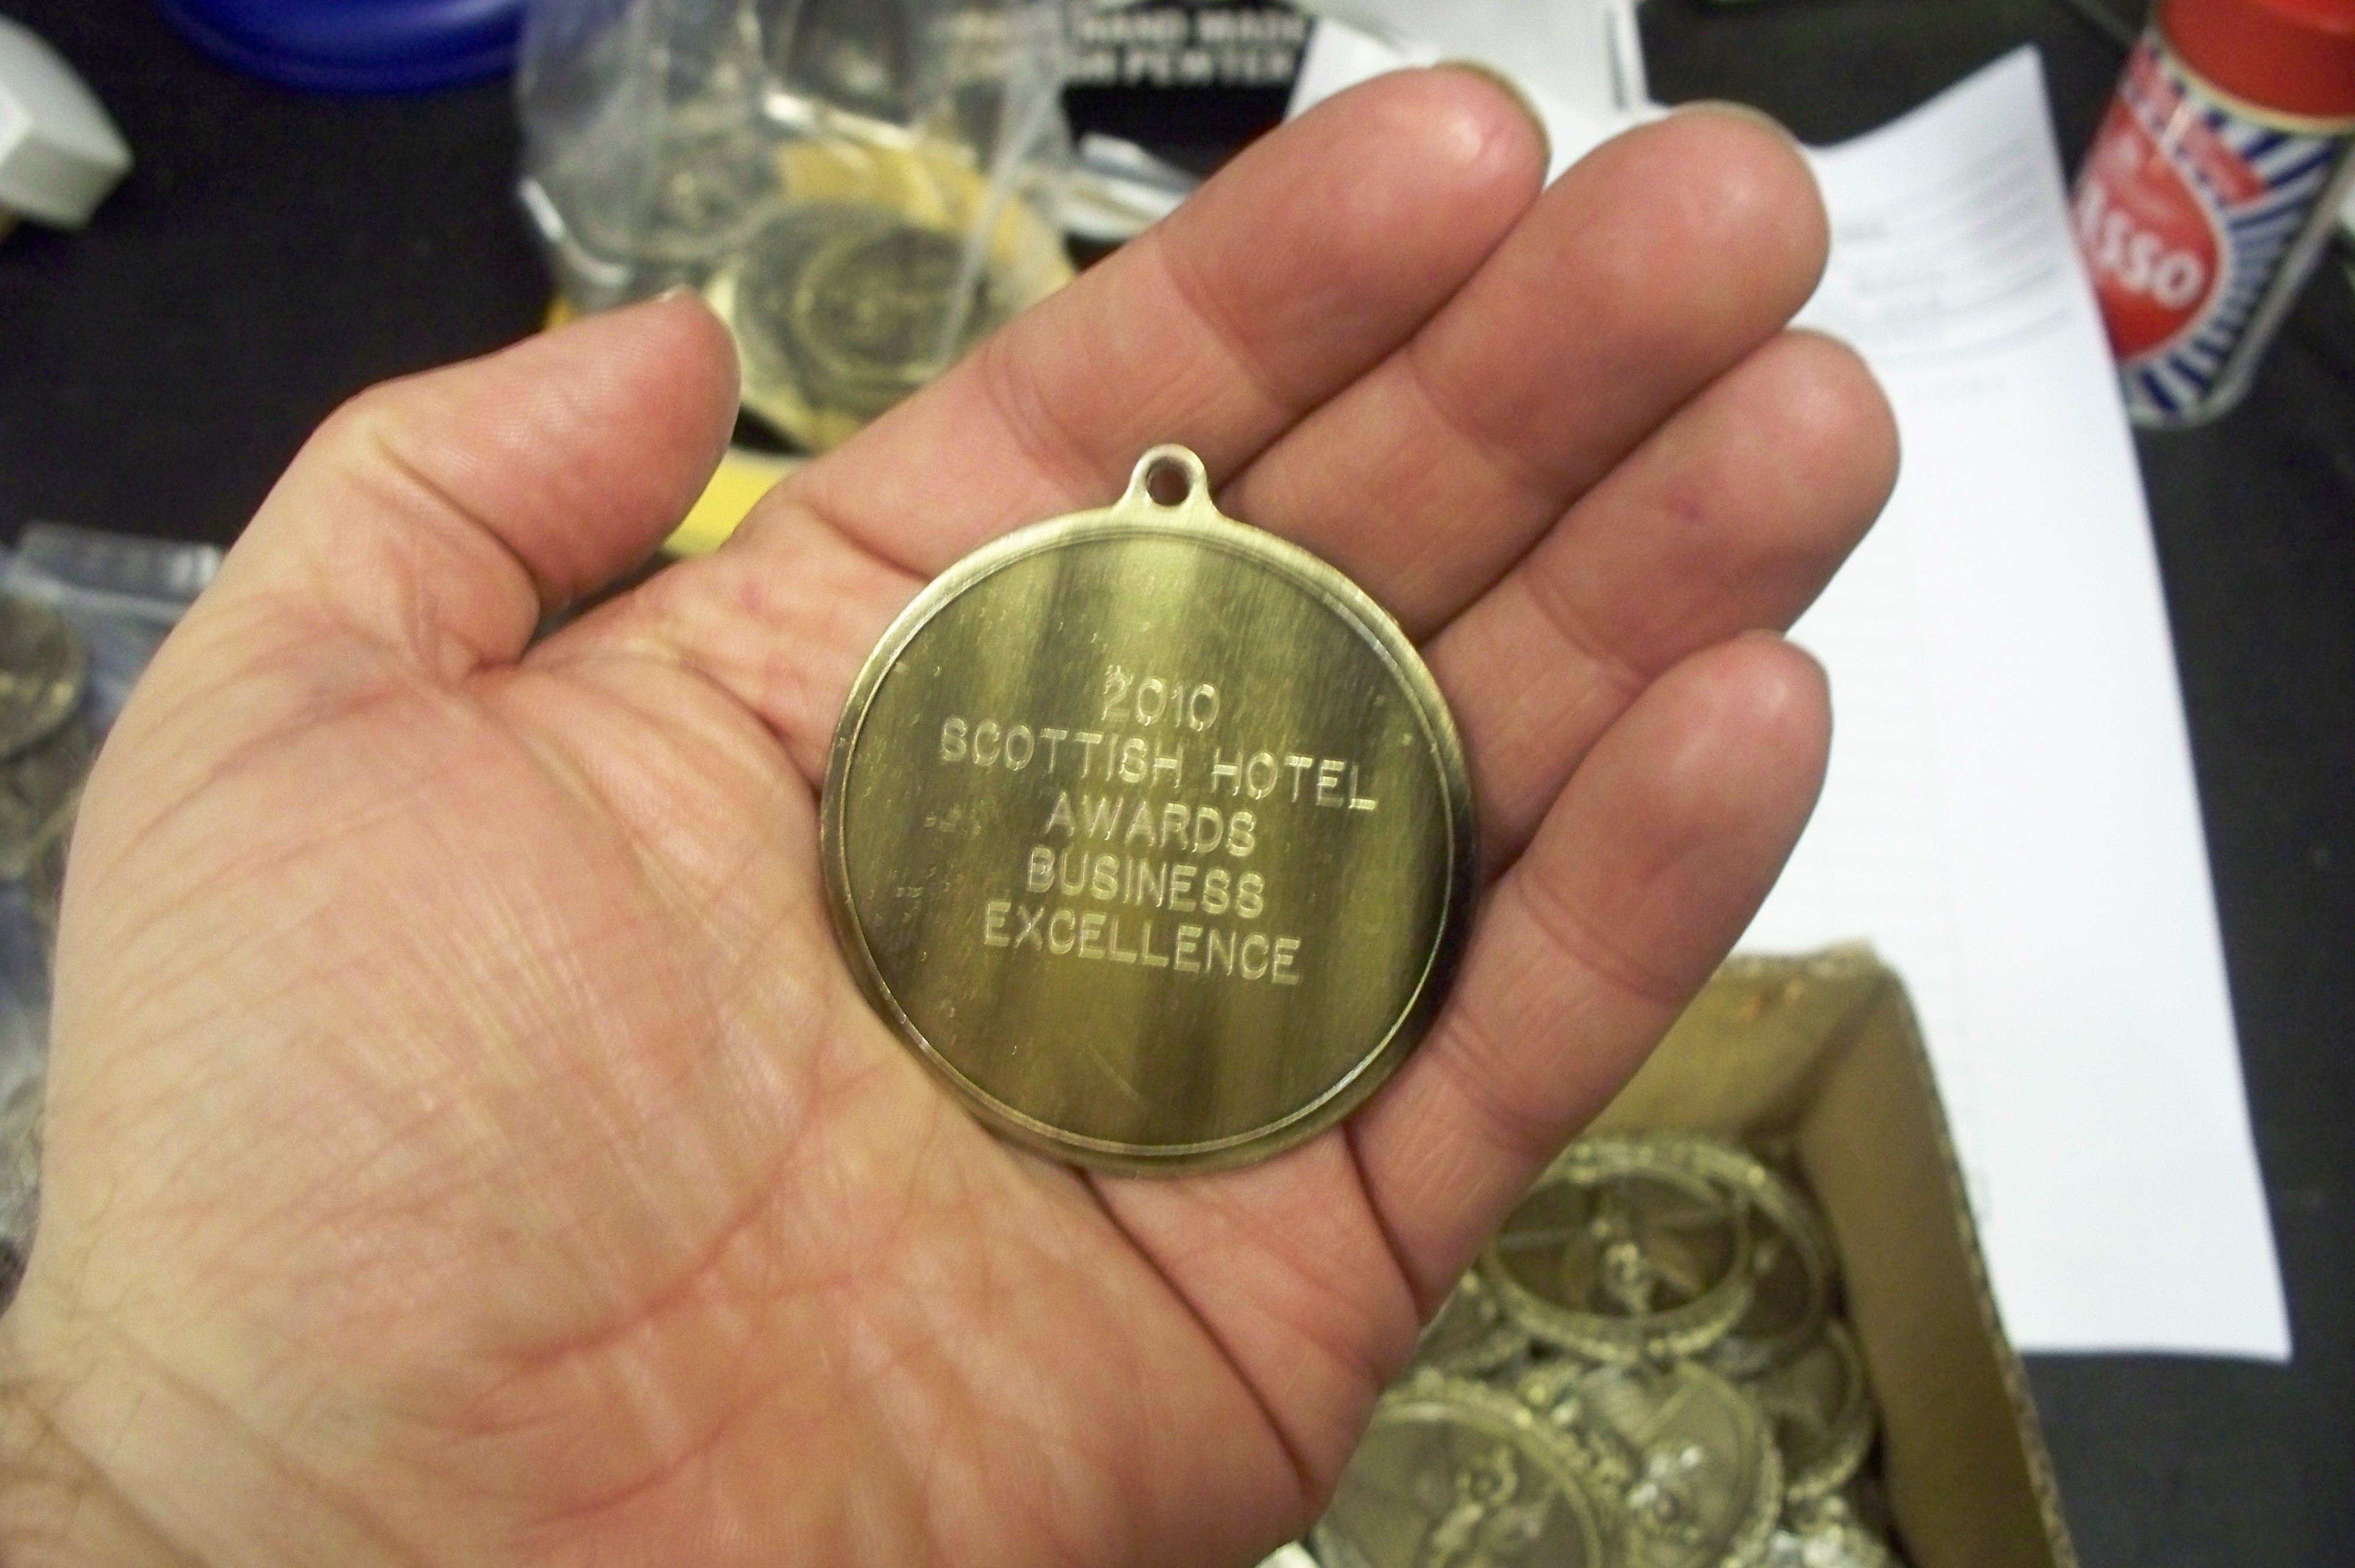 an engraved medal with details of an event won held by an engraver